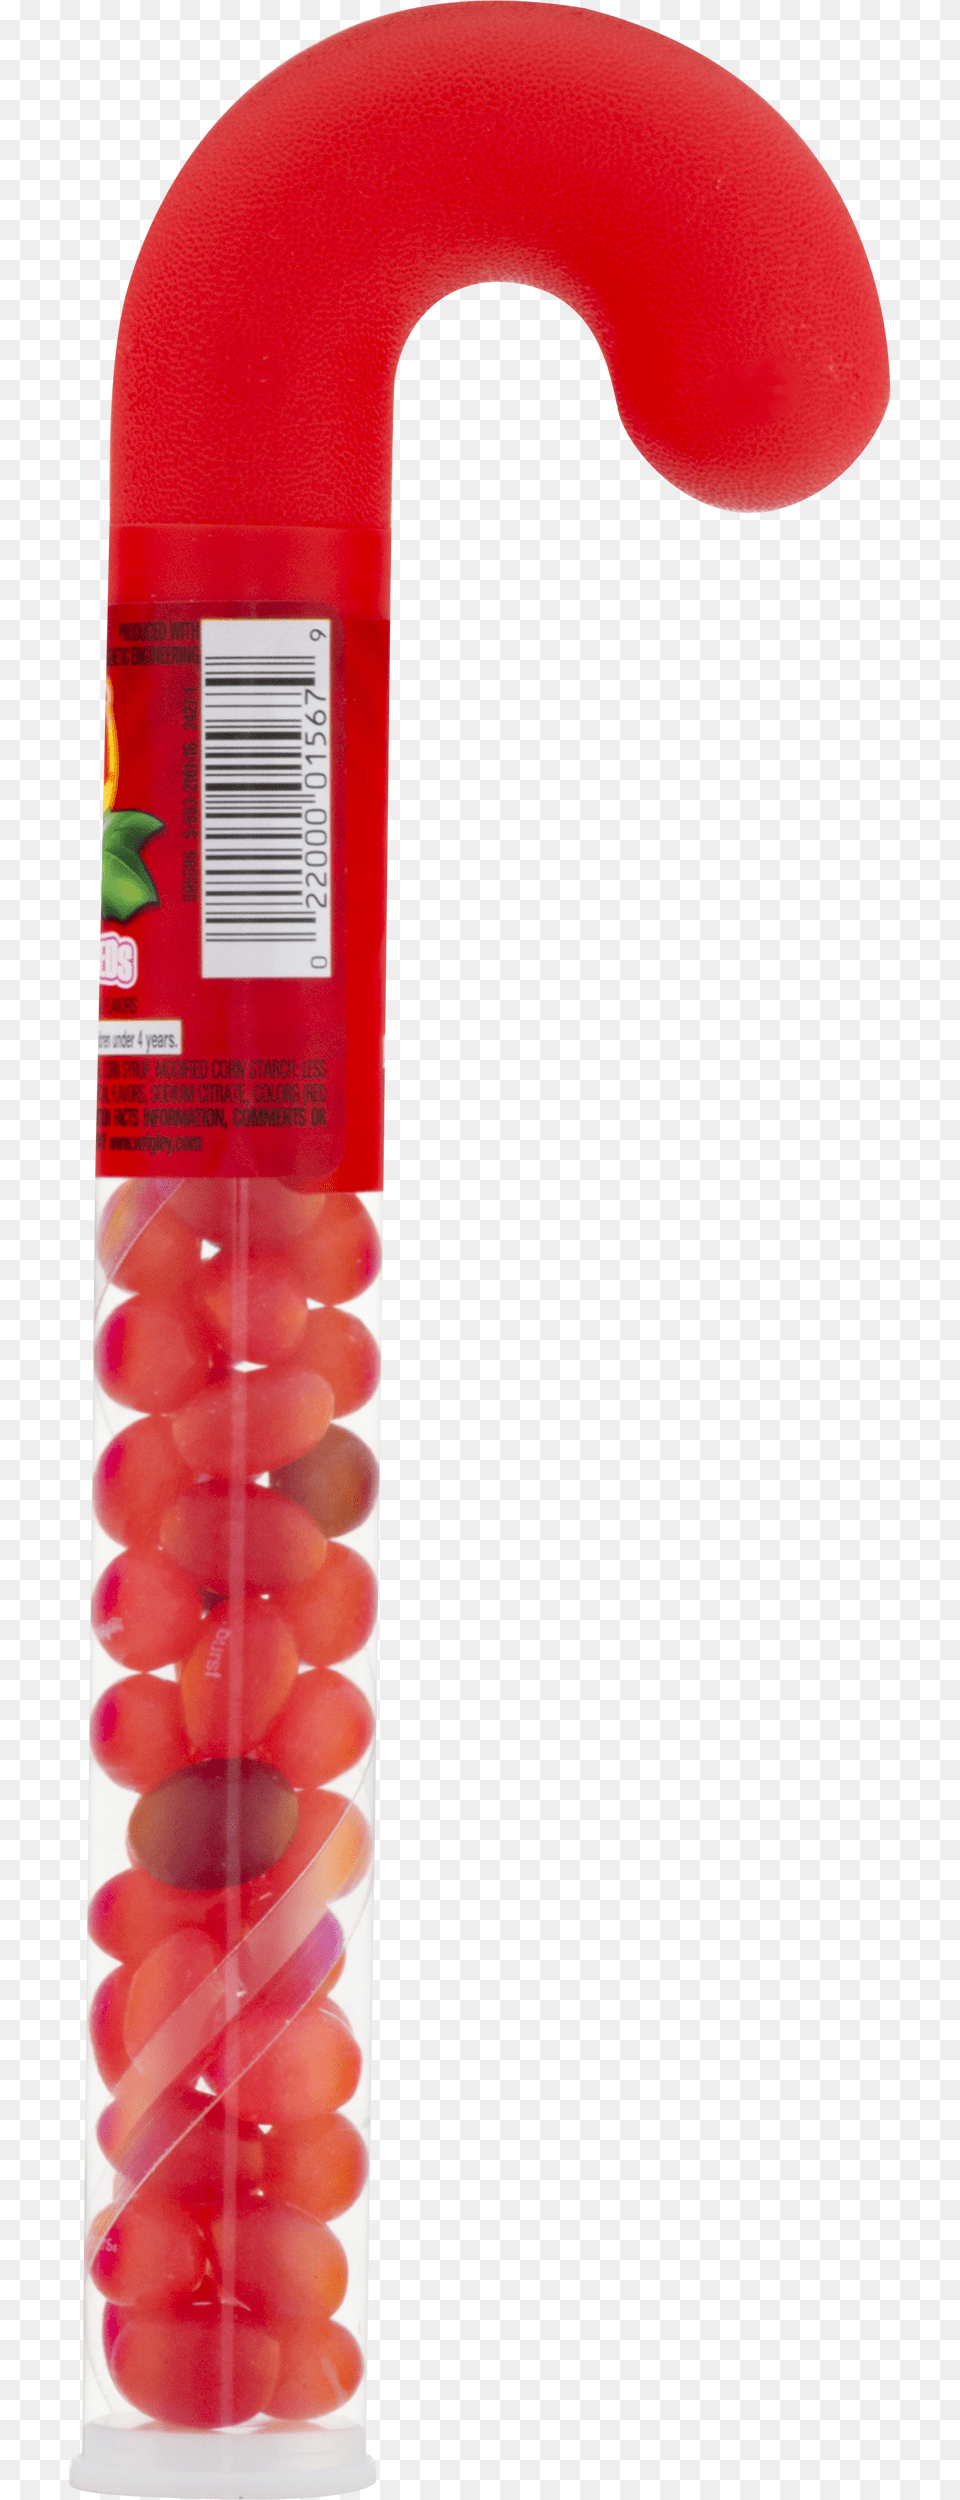 Starburst Holiday Jelly Bean Christmas Candy Cane Oz Free Png